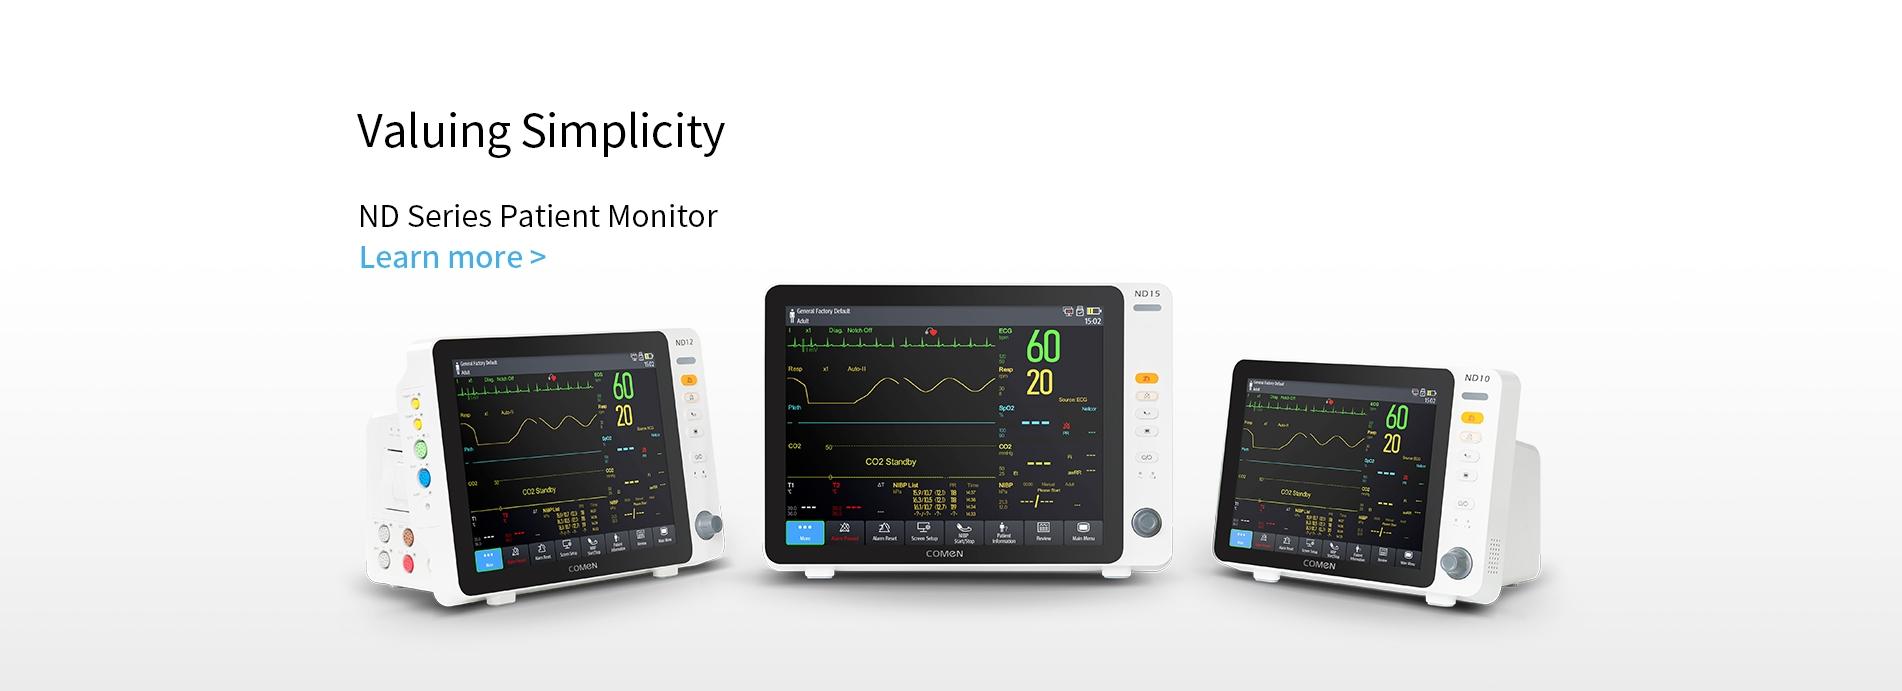 Valuing Simplicity ND Series Patient Monitor